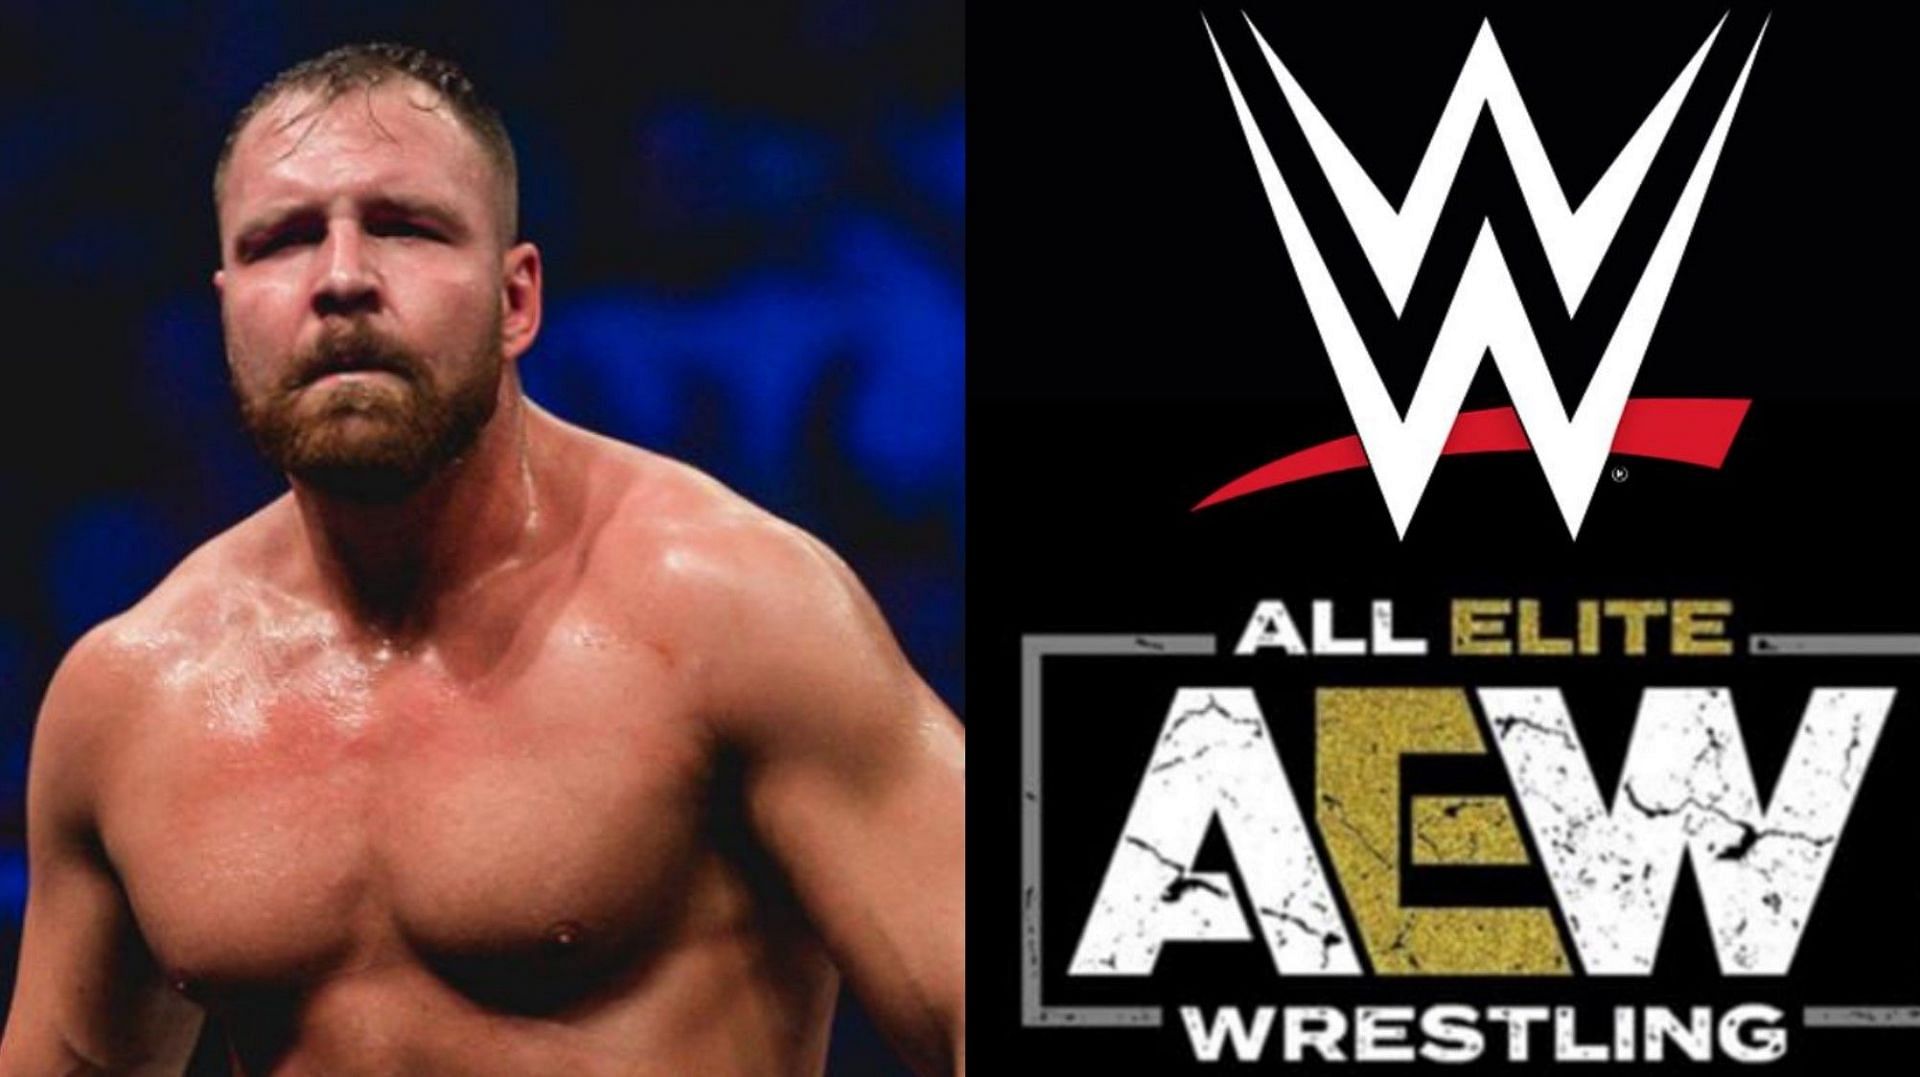 Jon Moxley is gearing up for wrestling return this month!